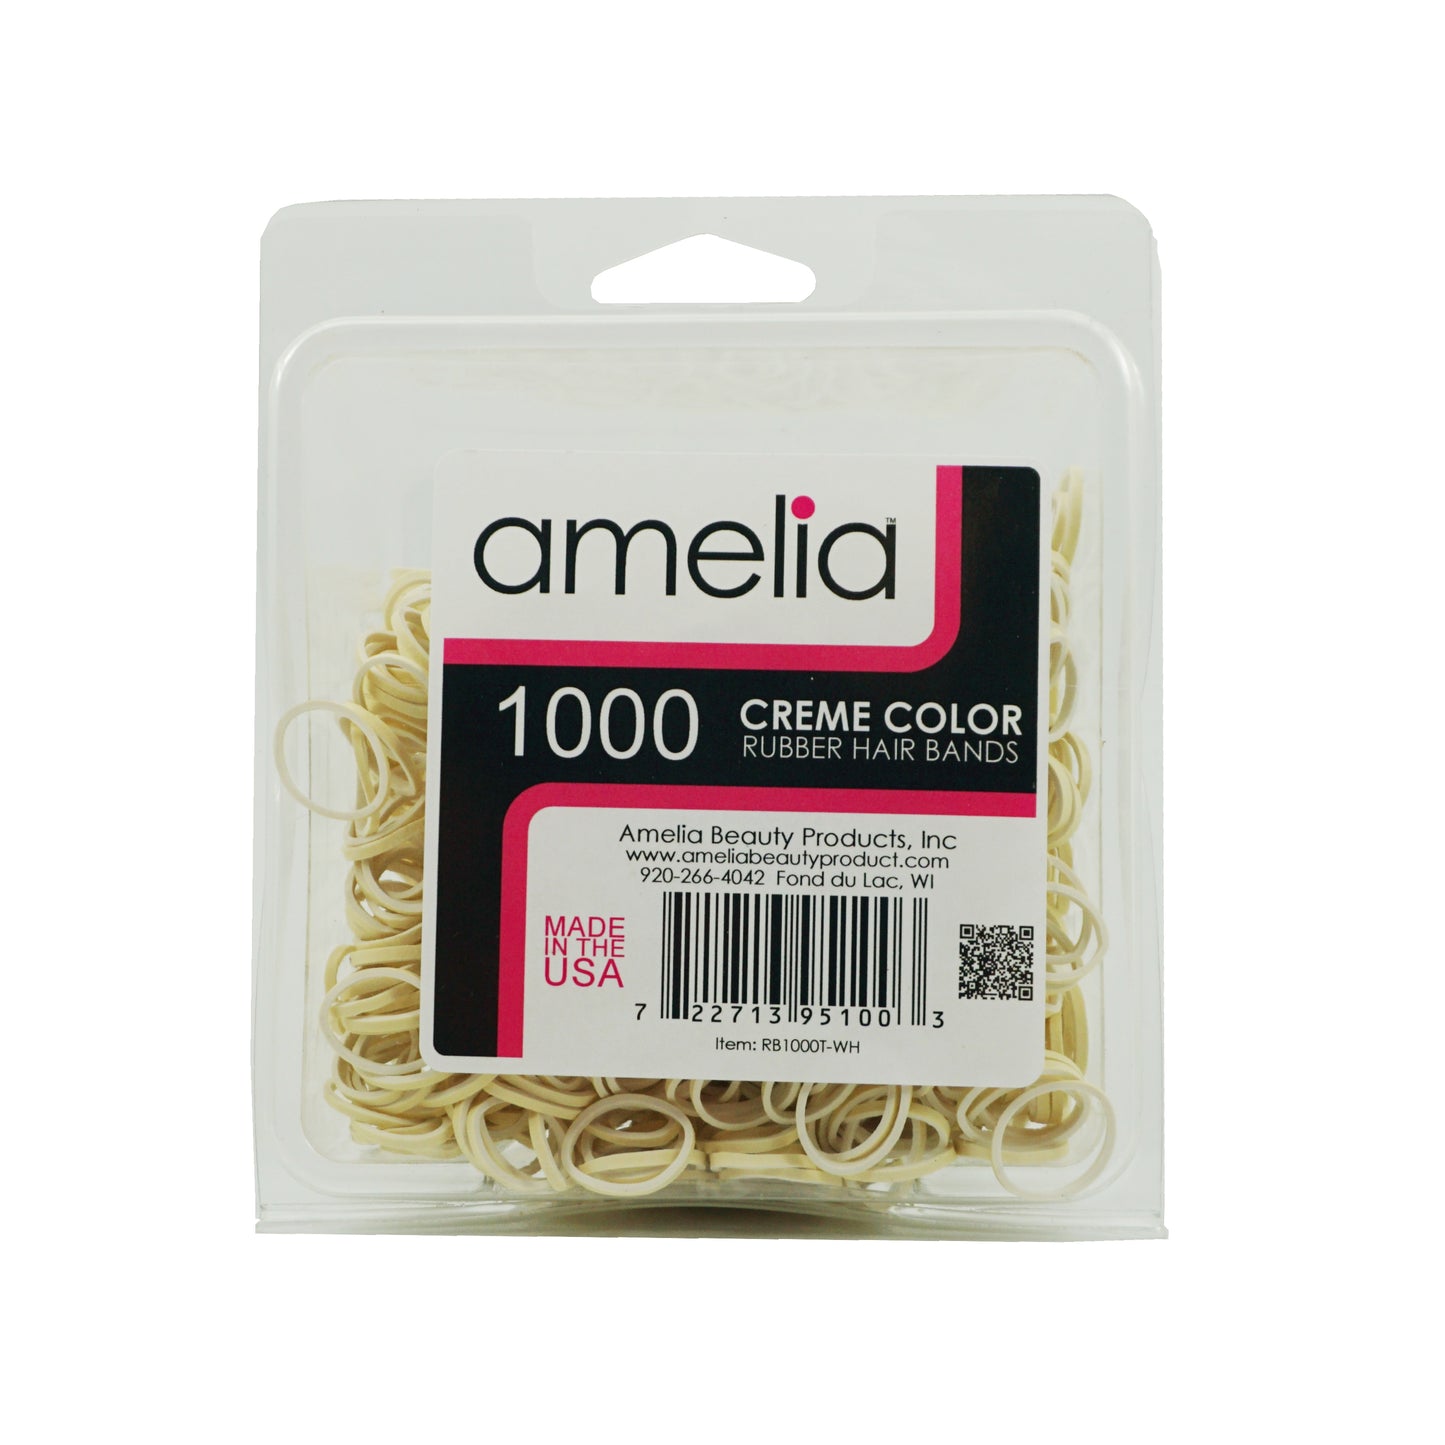 Amelia Beauty | 1/2in, Creme, Elastic Rubber Band Pony Tail Holders | Made in USA, Ideal for Ponytails, Braids, Twists, Dreadlocks, Styling Accessories for Women, Men and Girls | 1000 Pack